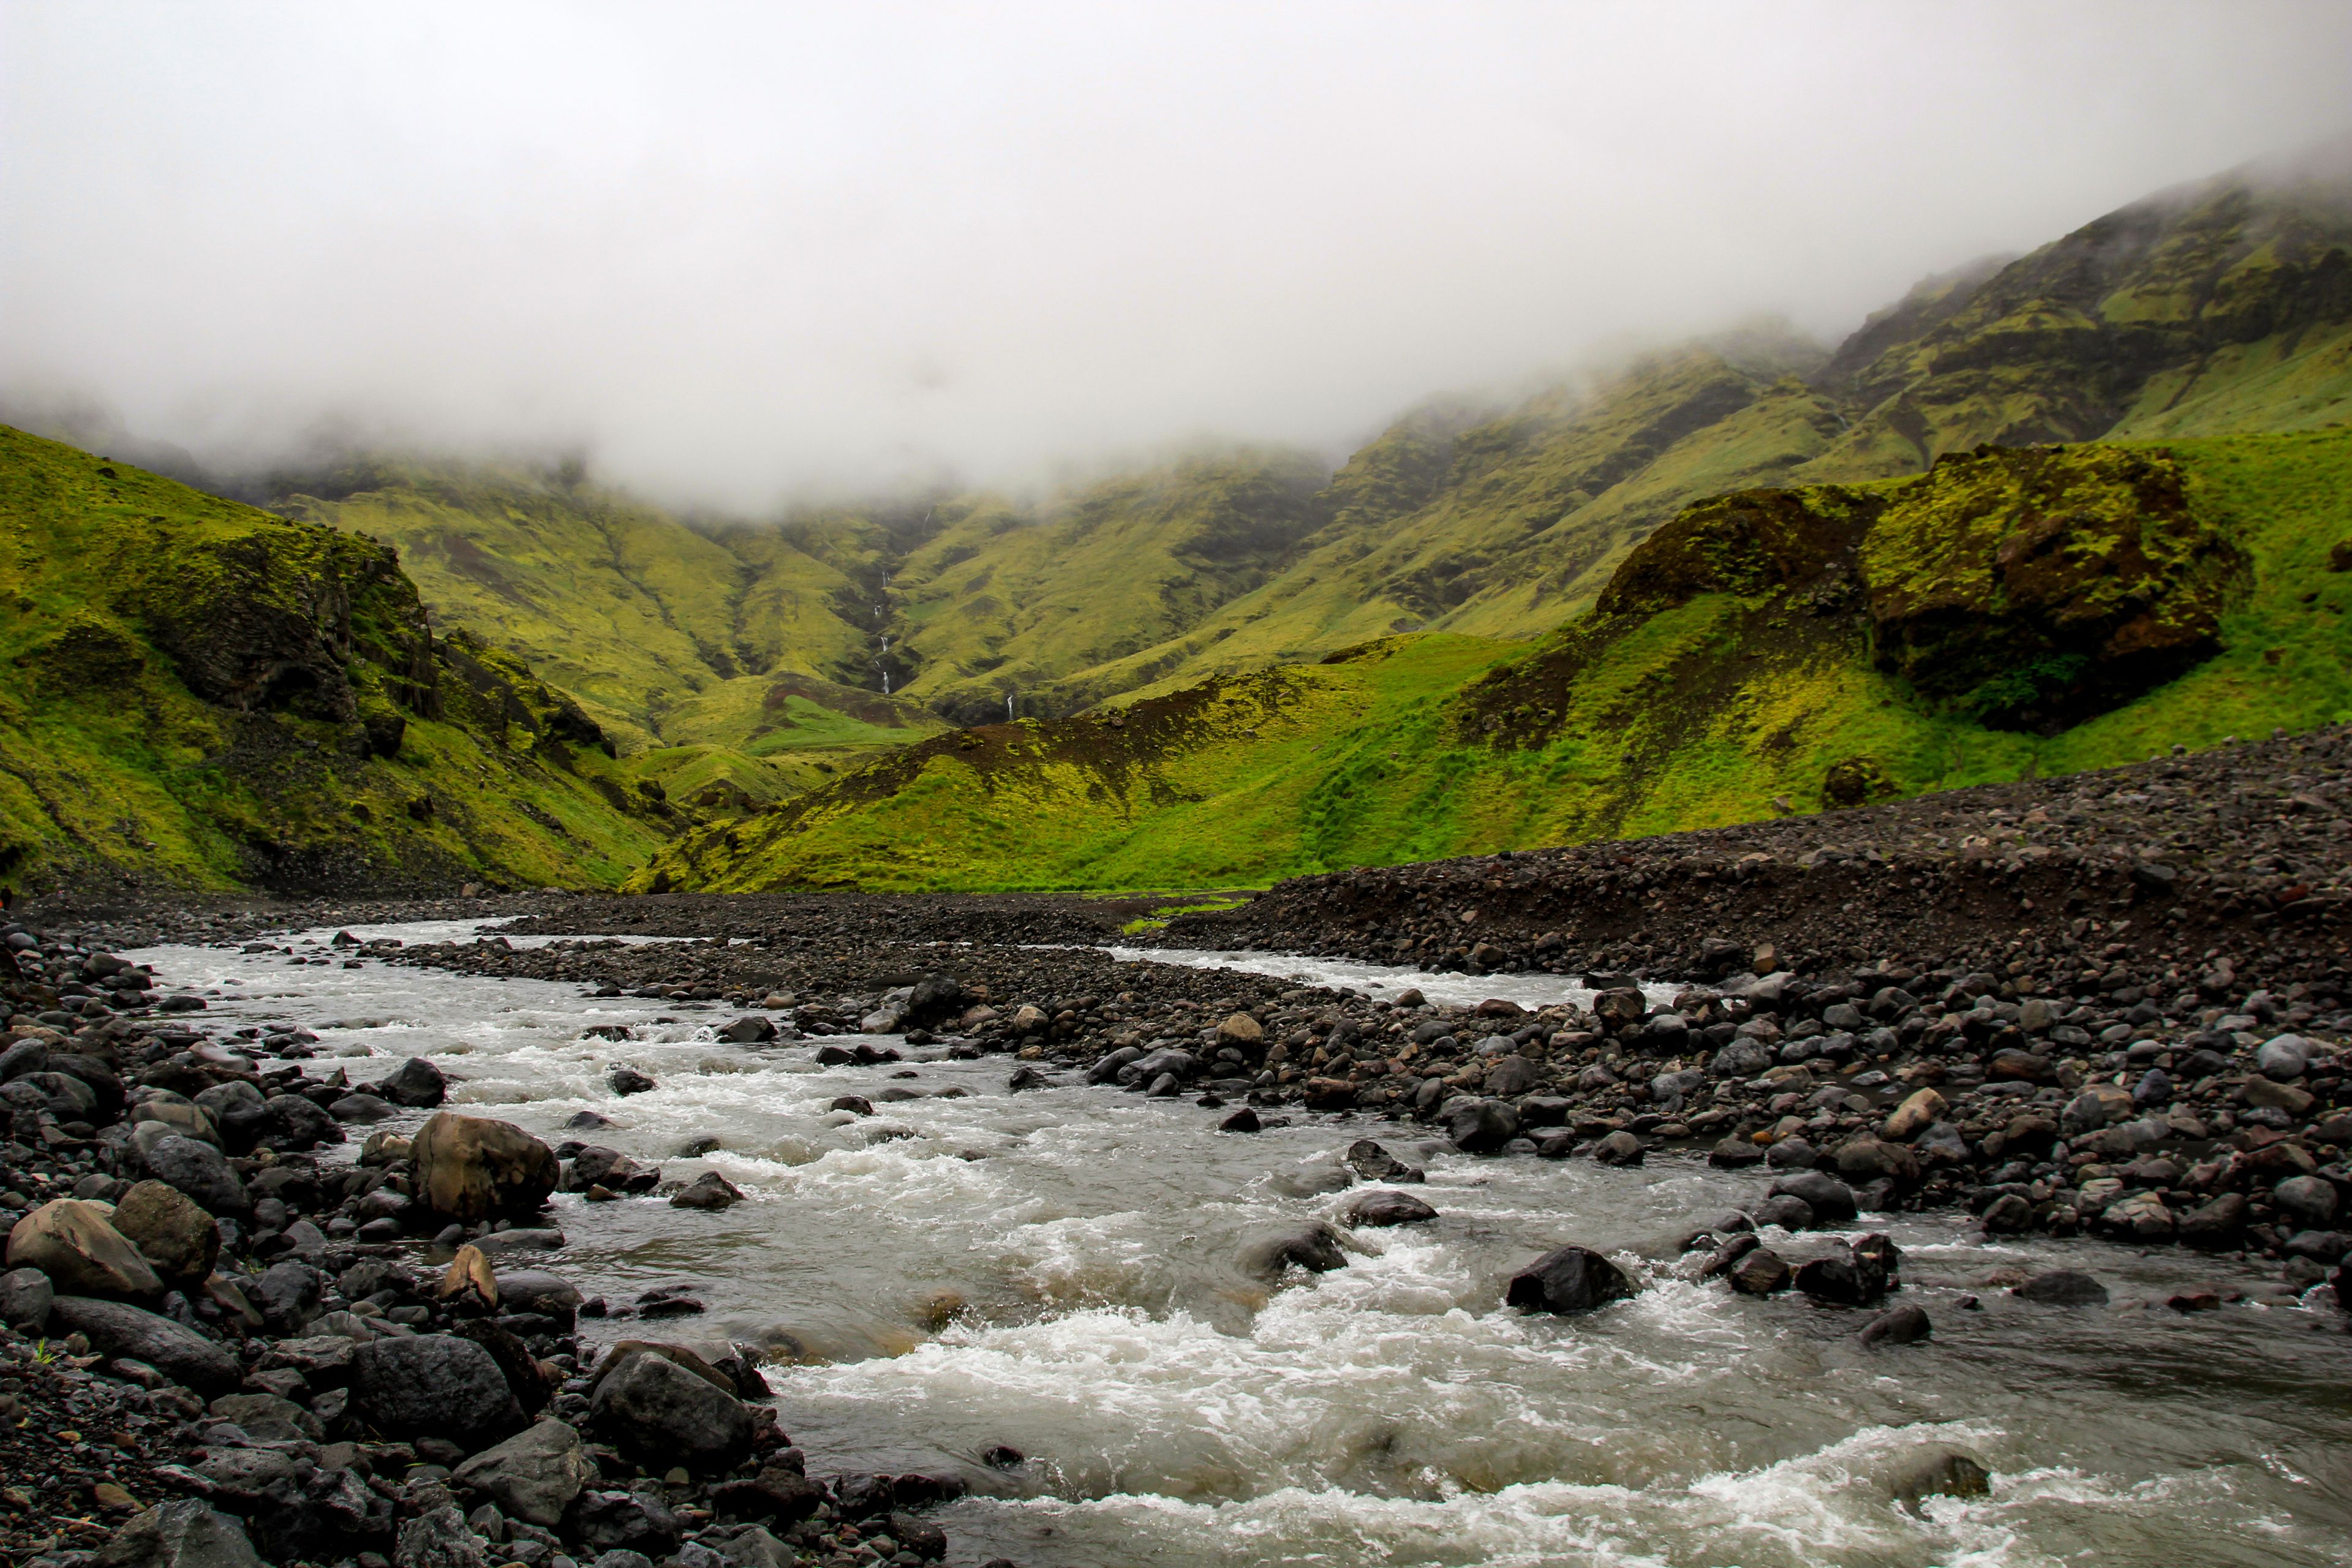 Iceland's Seljavellir valley contains lava rocks that have been covered in moss and a river.